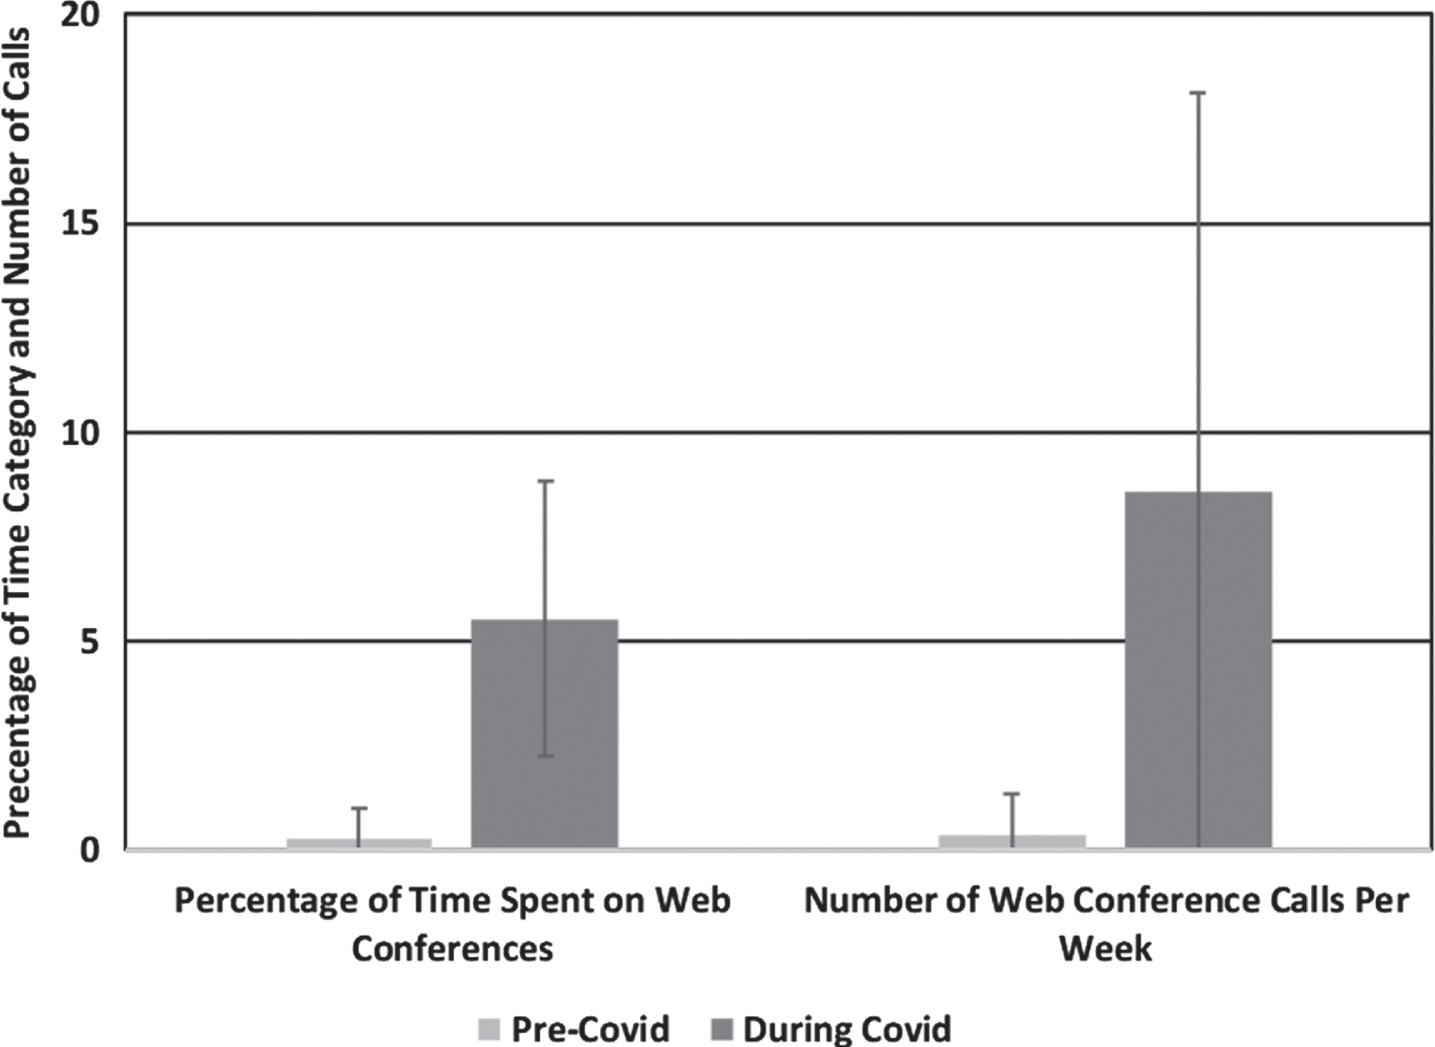 Pre- and during COVID perceptions of the percentage of time spent on web conferences (0: None, 1: 1 to 10%, 2: 11 to 20%, 3: 21 to 30%, 4: 31 to 40%, 5: 41 to 50%, 6: 51 to 60%, 7: 61 to 70%, 8: 71 to 90%, 9: 81 to 90%, 10: 91 to 100%) and number of web conference calls per week. All differences between pre and during are significant at p < 0.05.